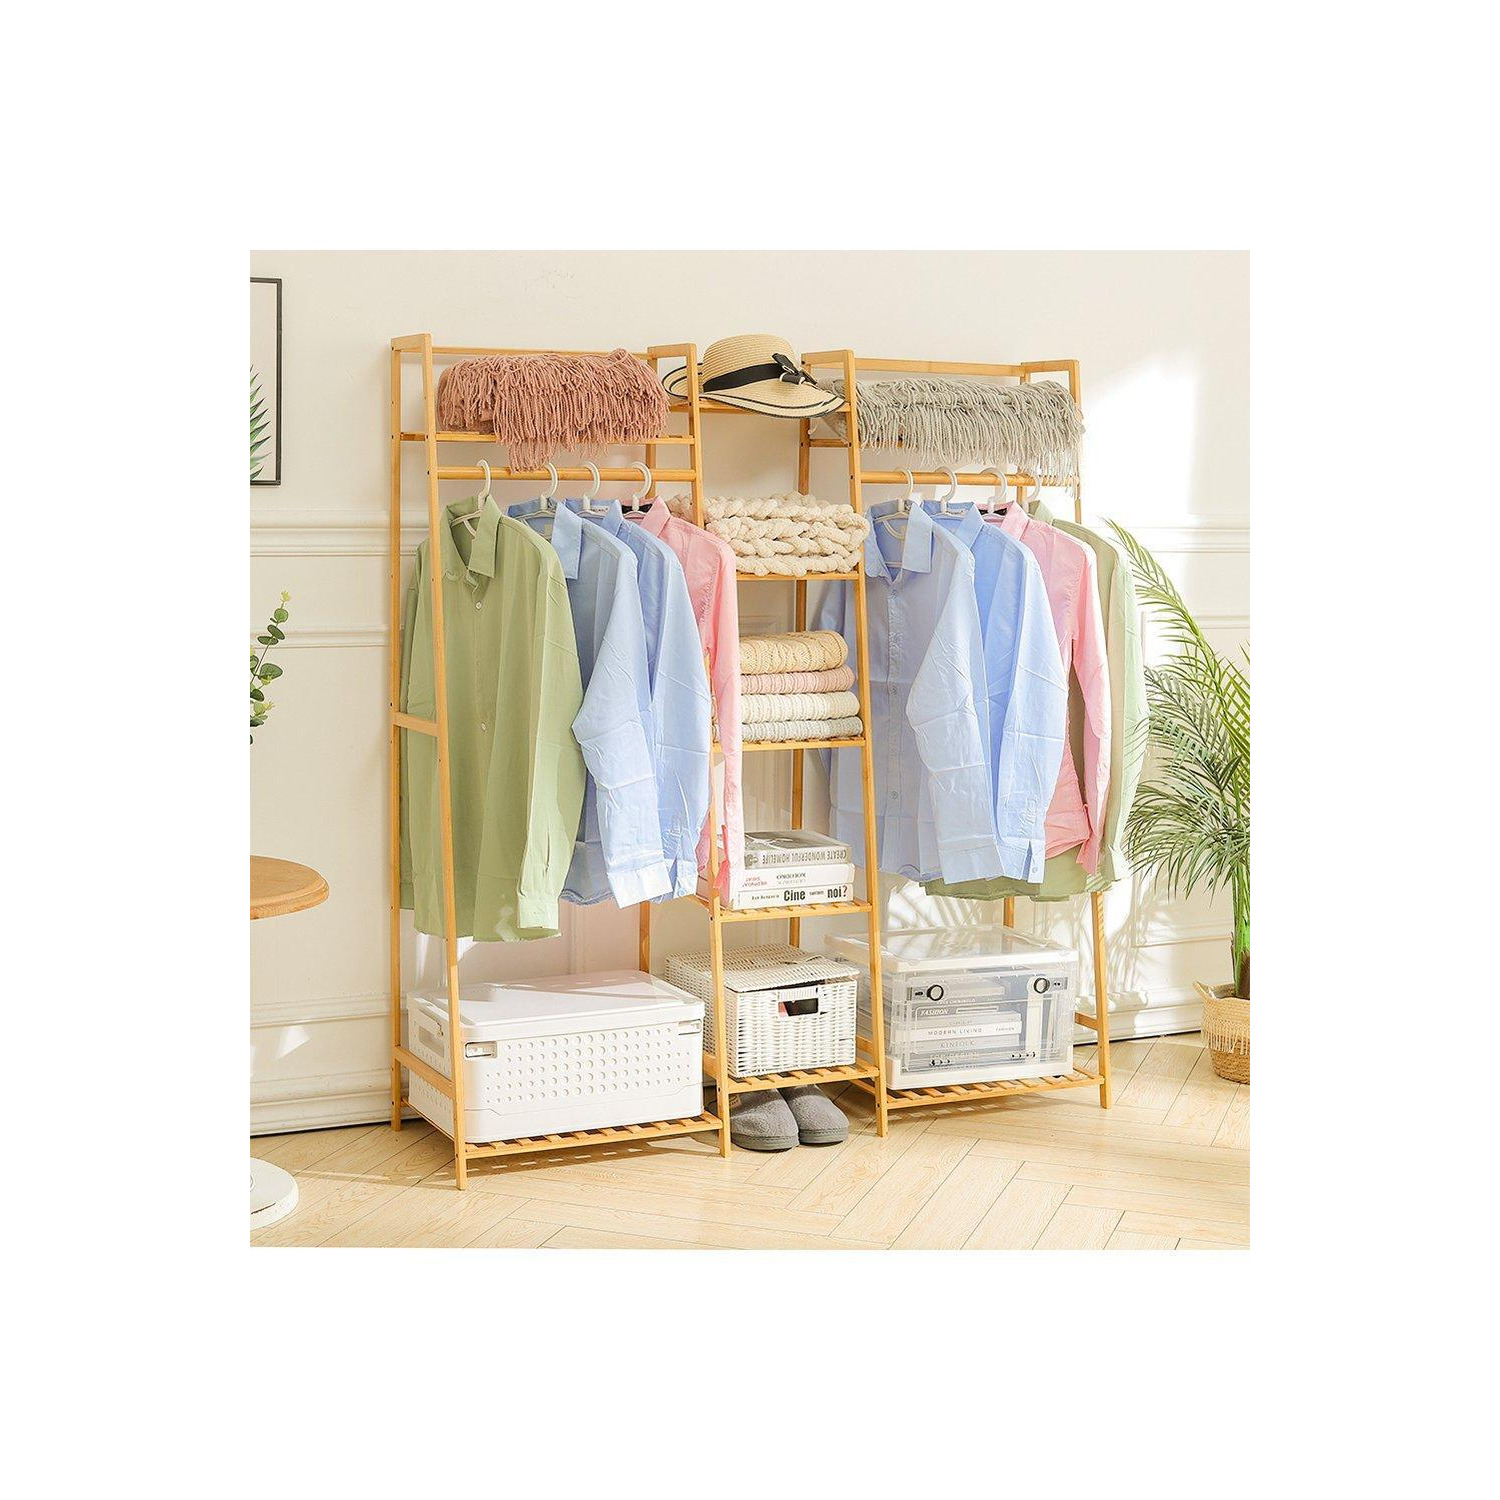 Multi-Functional Clothes Hanging Rack Stand - image 1